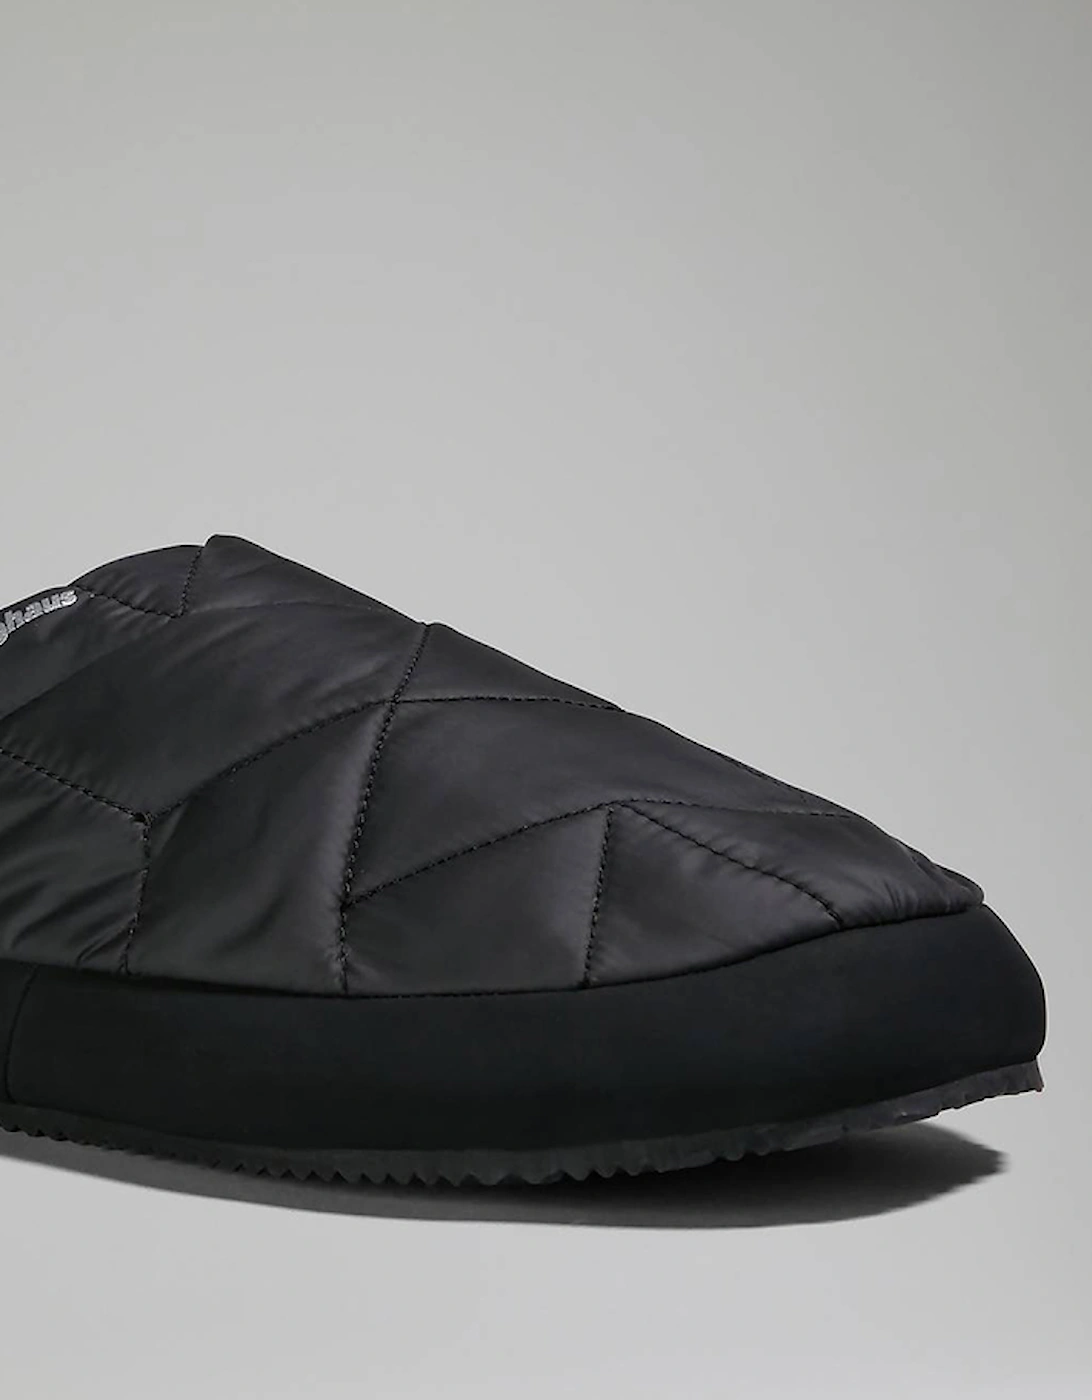 Men's Bothy 2.0 Synthetic Insulated Slippers